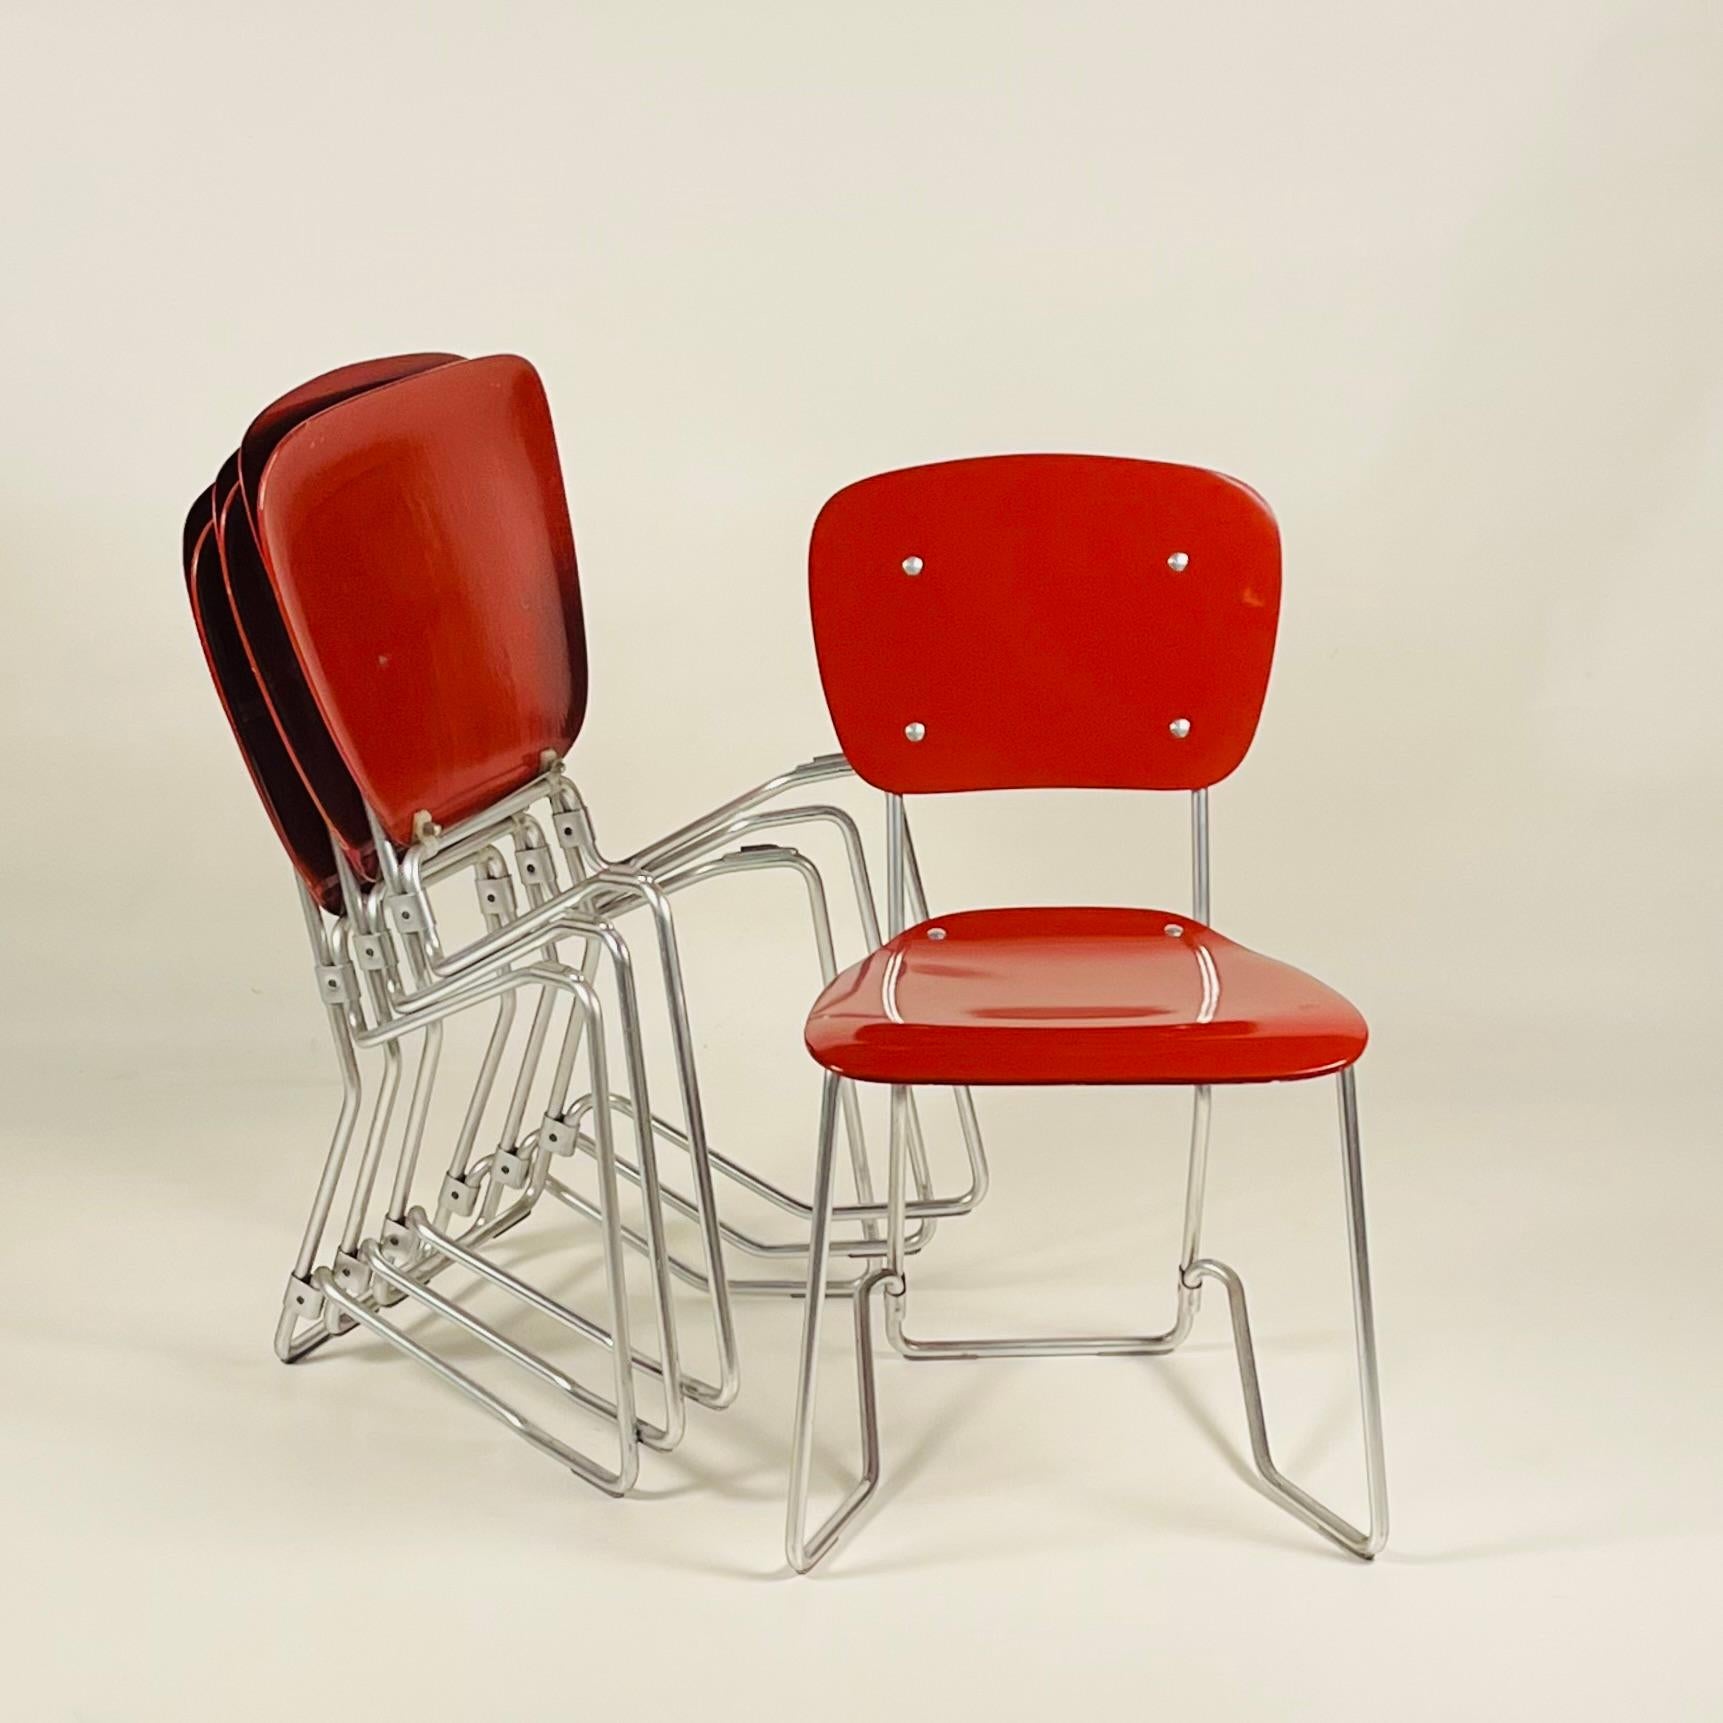 Swiss Set of 4 Stacking Chairs by Armin Wirth and Aluflex, 1950s  For Sale